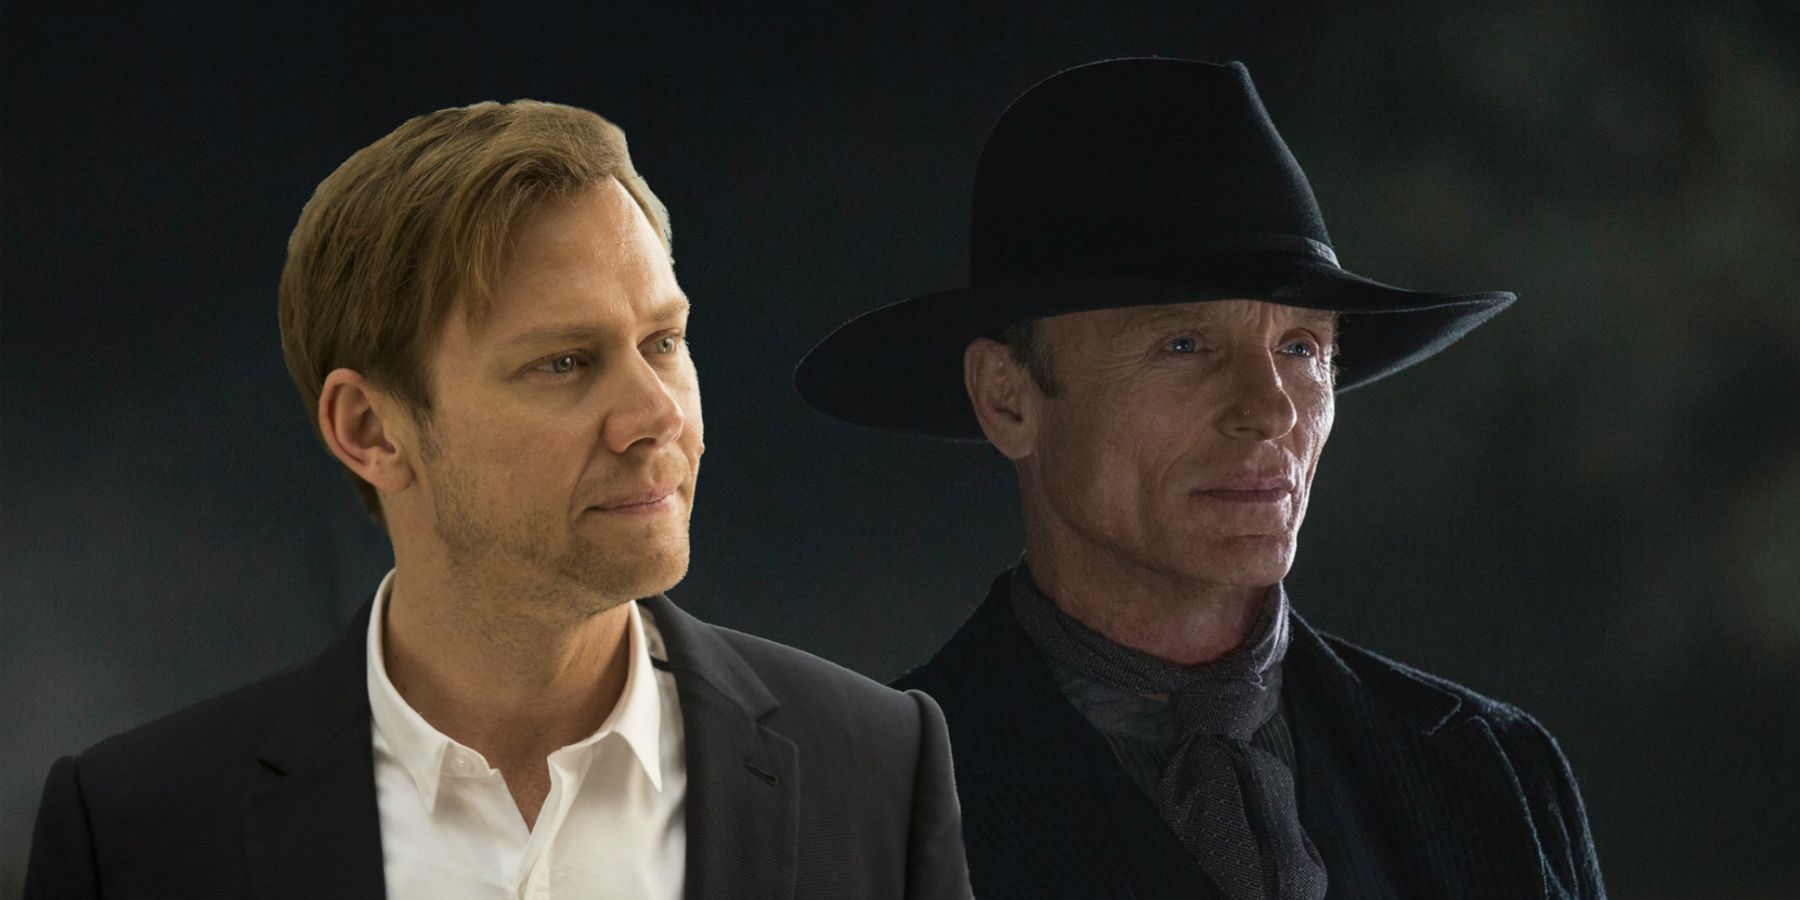 Young William and the Man in Black from Westworld